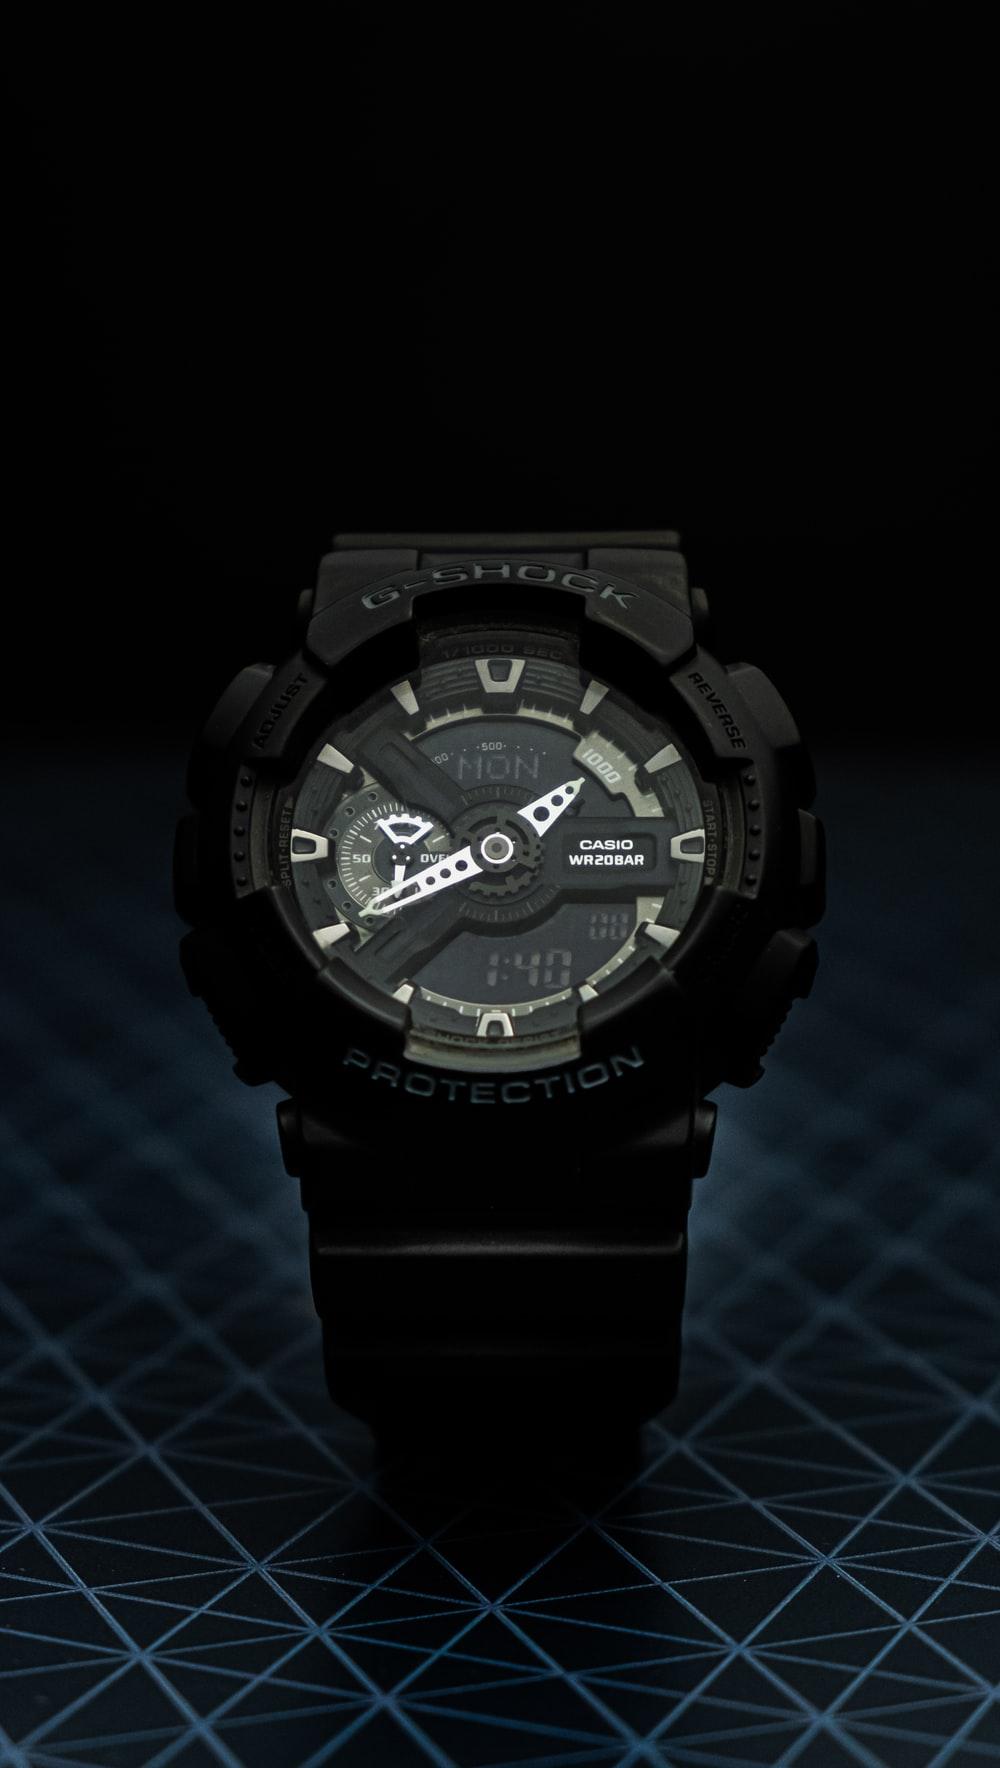 G Shock Picture. Download Free Image